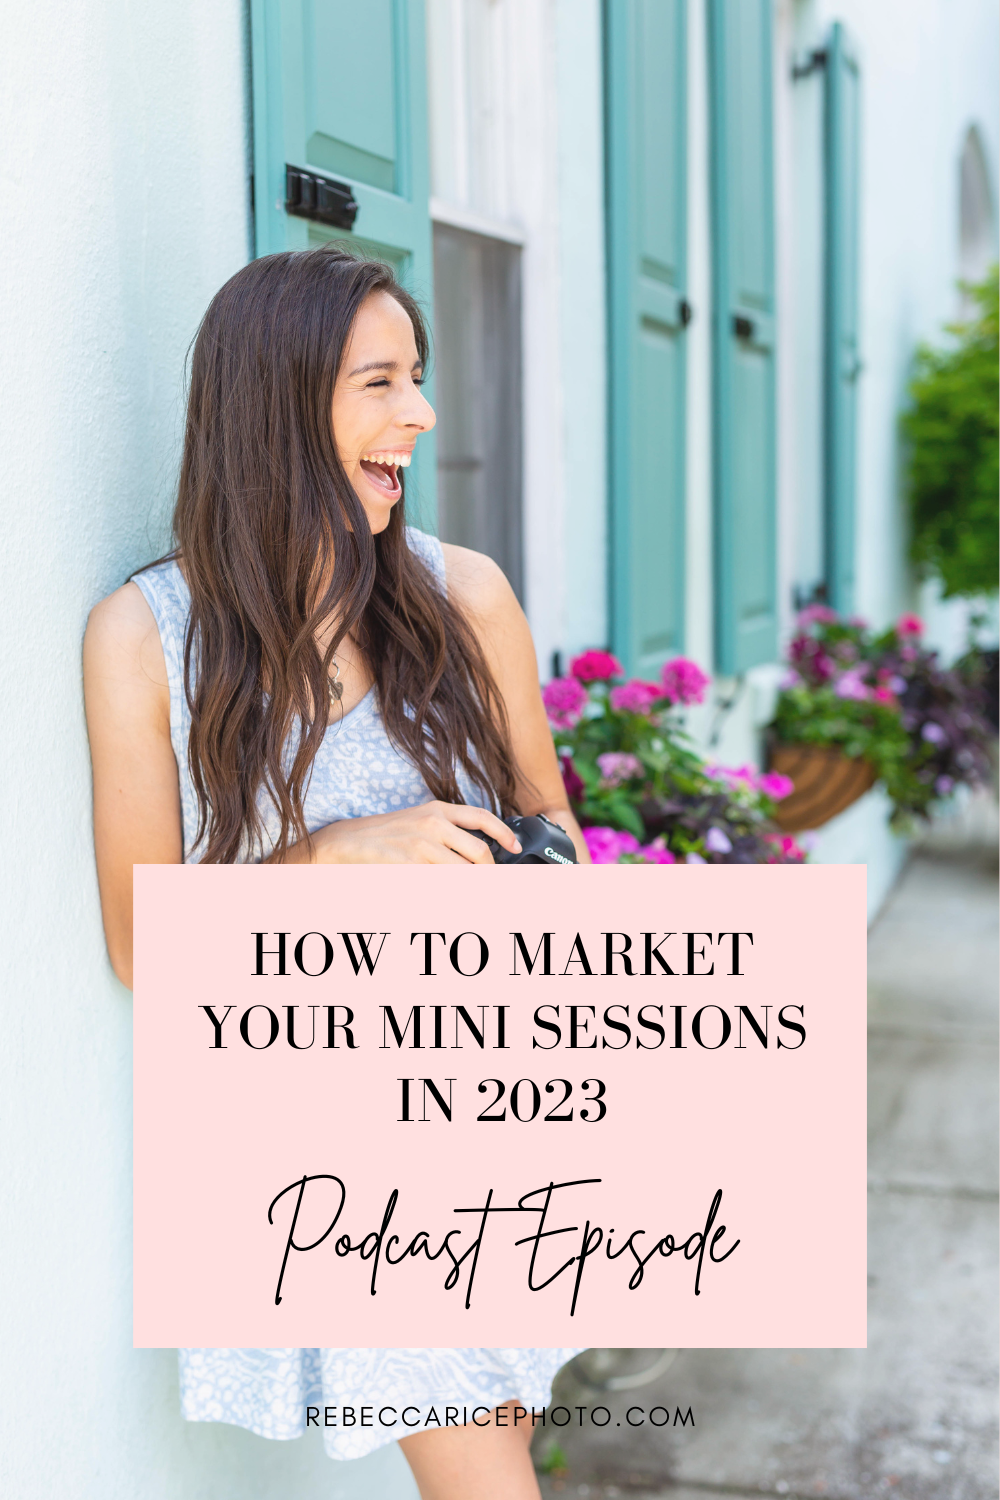 How to Market Your Mini Sessions in 2023